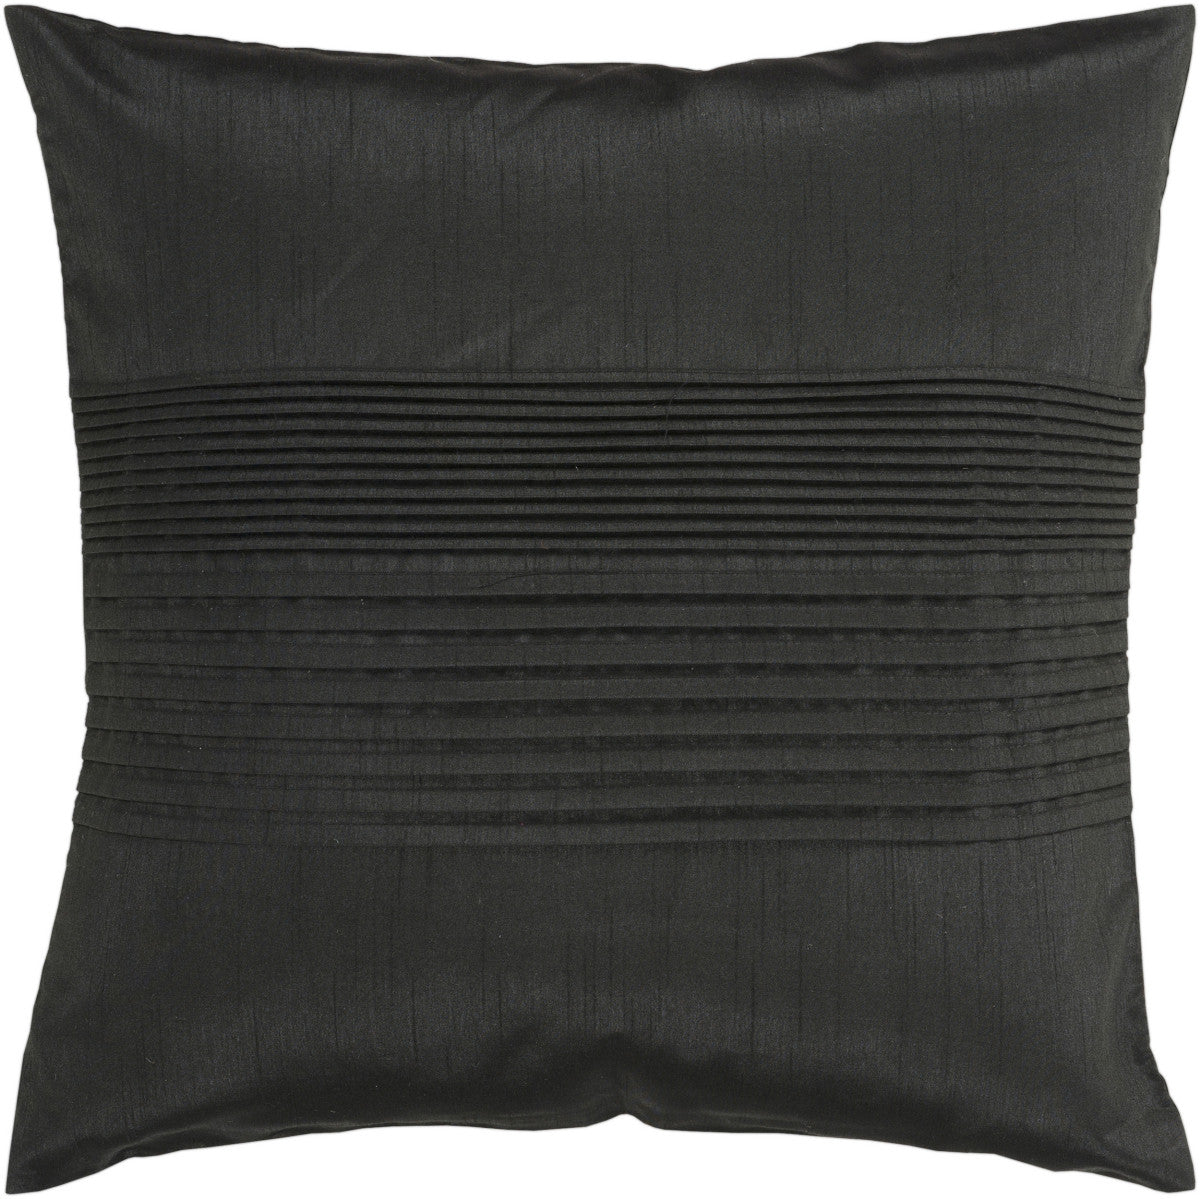 Surya Solid Pleated Lori Lee HH-027 Pillow